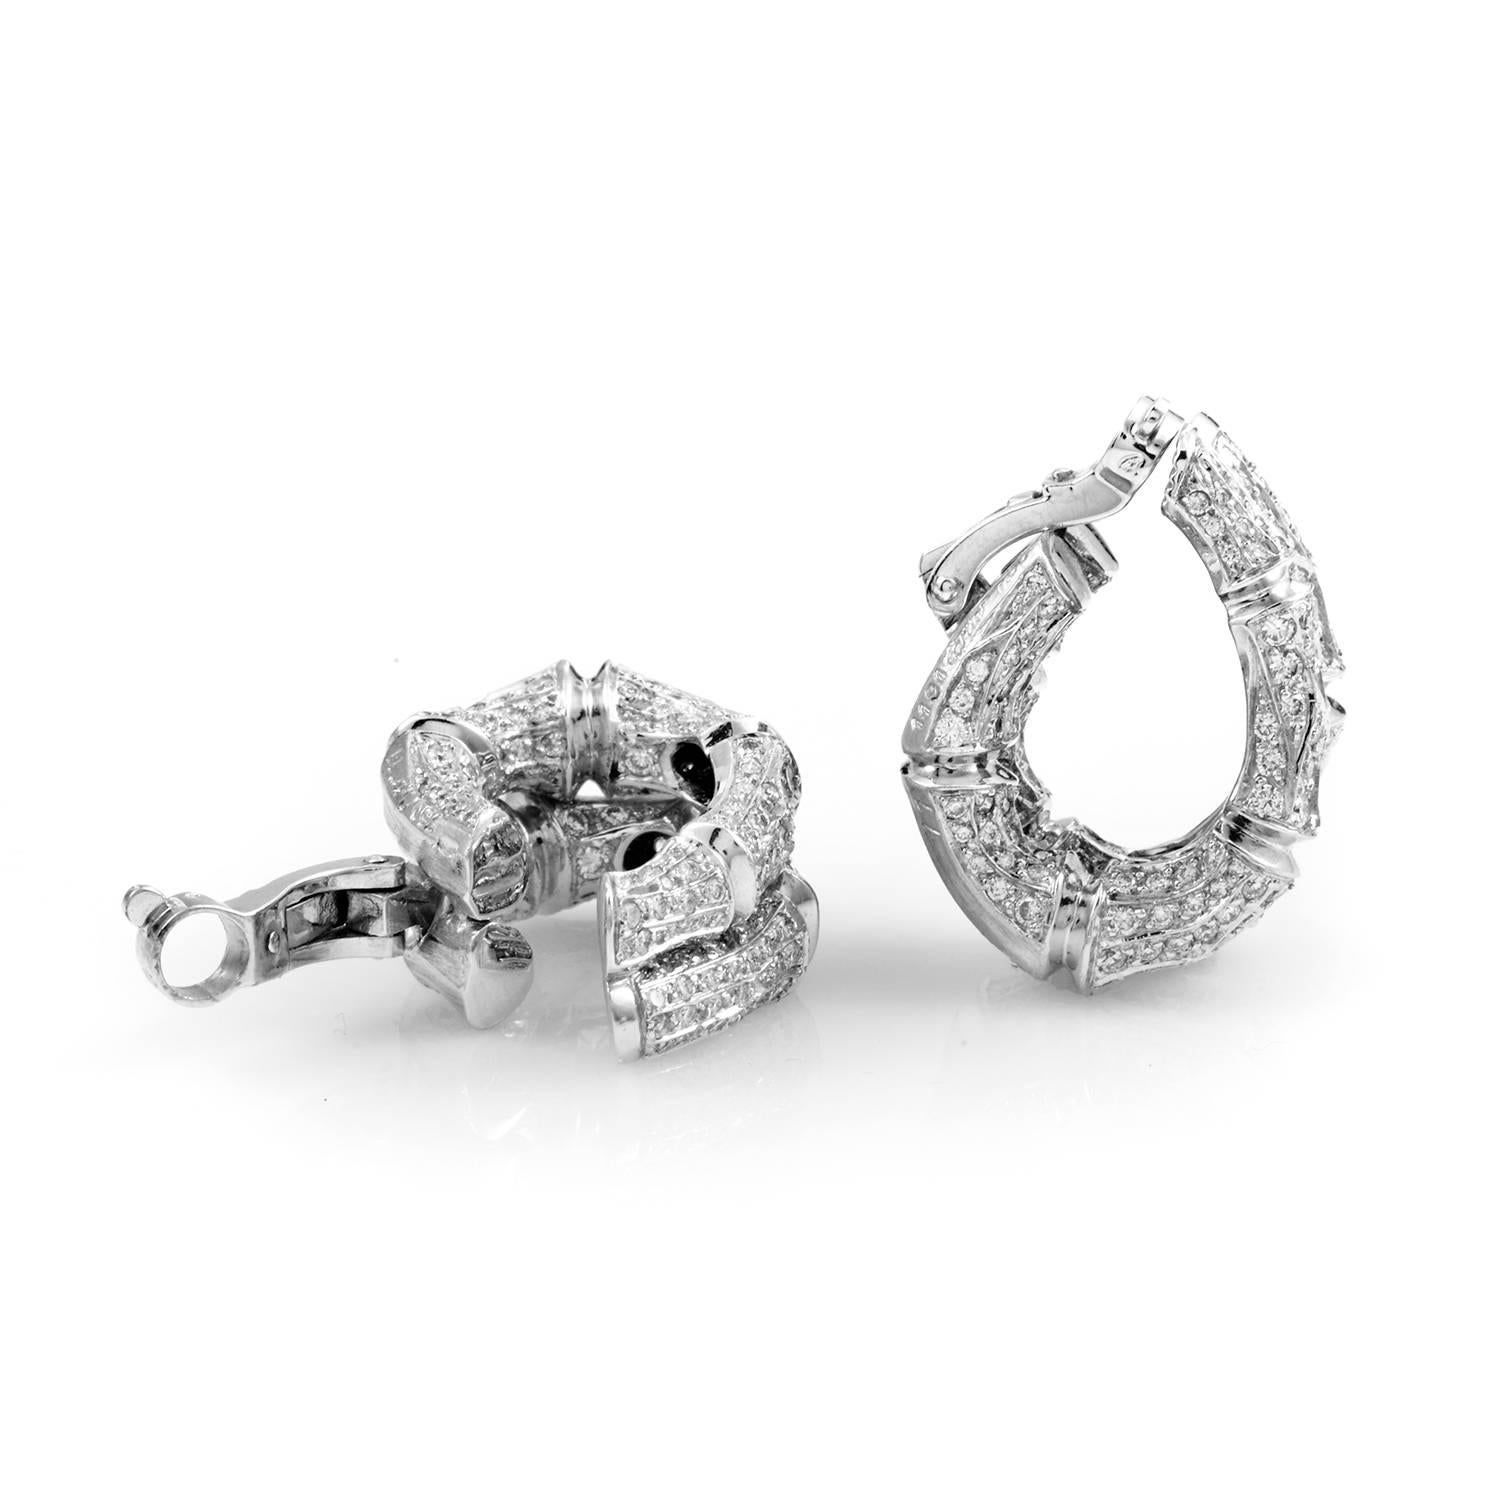 Cartier prompts precious metal to curl with exotic allure in this rare earring design. Twin bamboo shoots of 18K white gold embrace the air, rolling into themselves with organic rhythm. Every measure of this arcing design shimmers with the